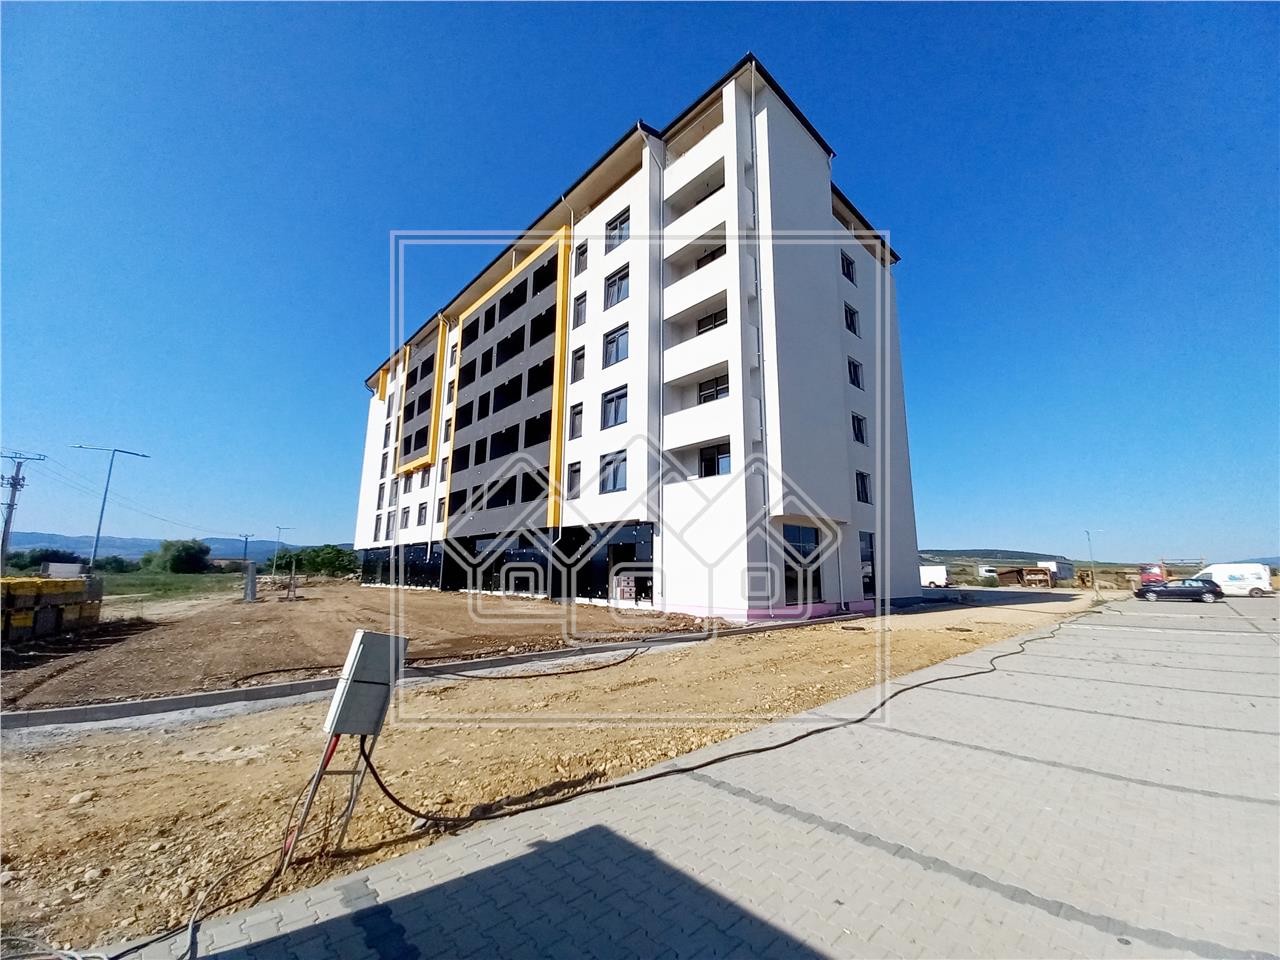 Apartment for sale in Alba Iulia - Sebes - 2 rooms and a balcony - New